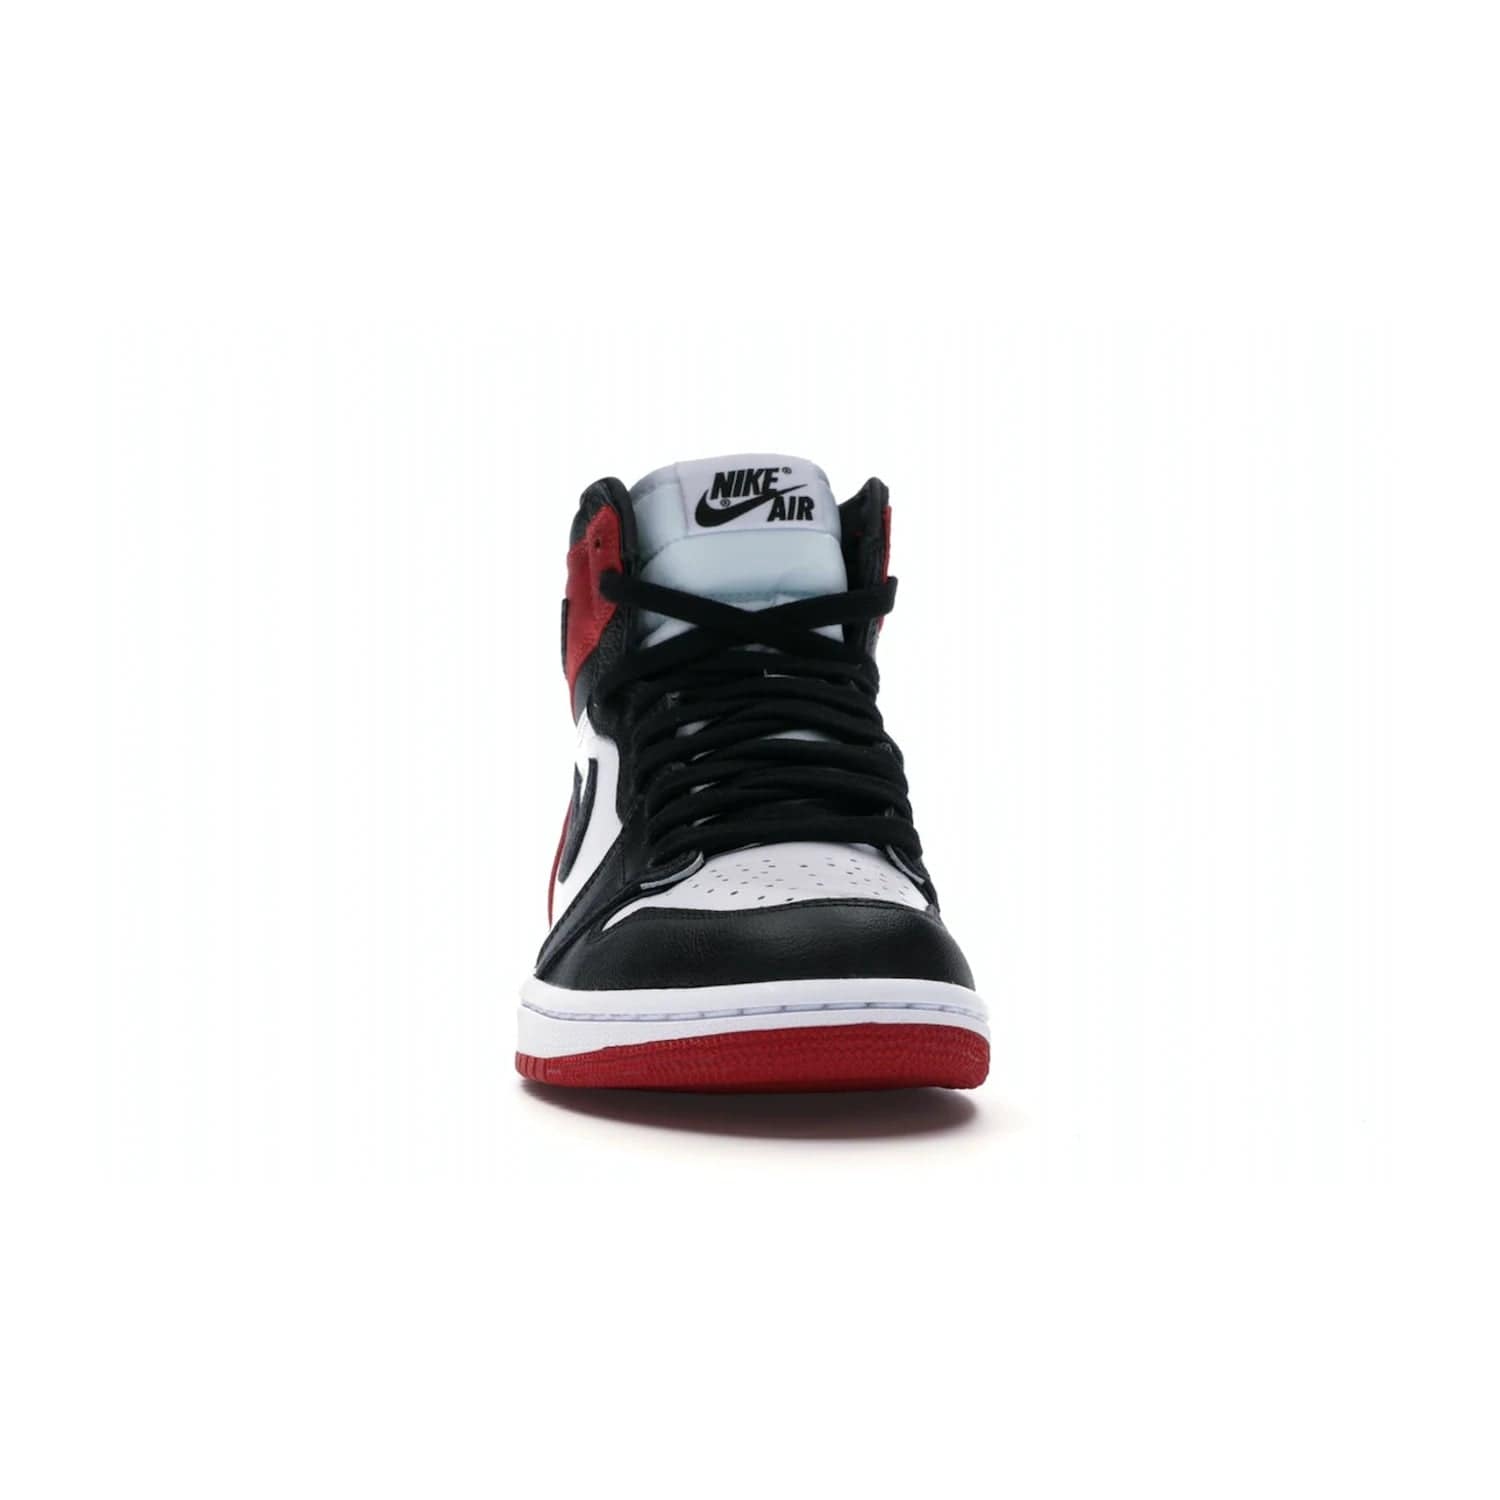 Jordan 1 Retro High Satin Black Toe (Women's) - Image 9 - Only at www.BallersClubKickz.com - Luxurious take on the timeless Air Jordan 1. Features a mix of black leather and satin materials with subtle University Red accents. Elevated look with metal Wings logo on the heel. Released in August 2019.